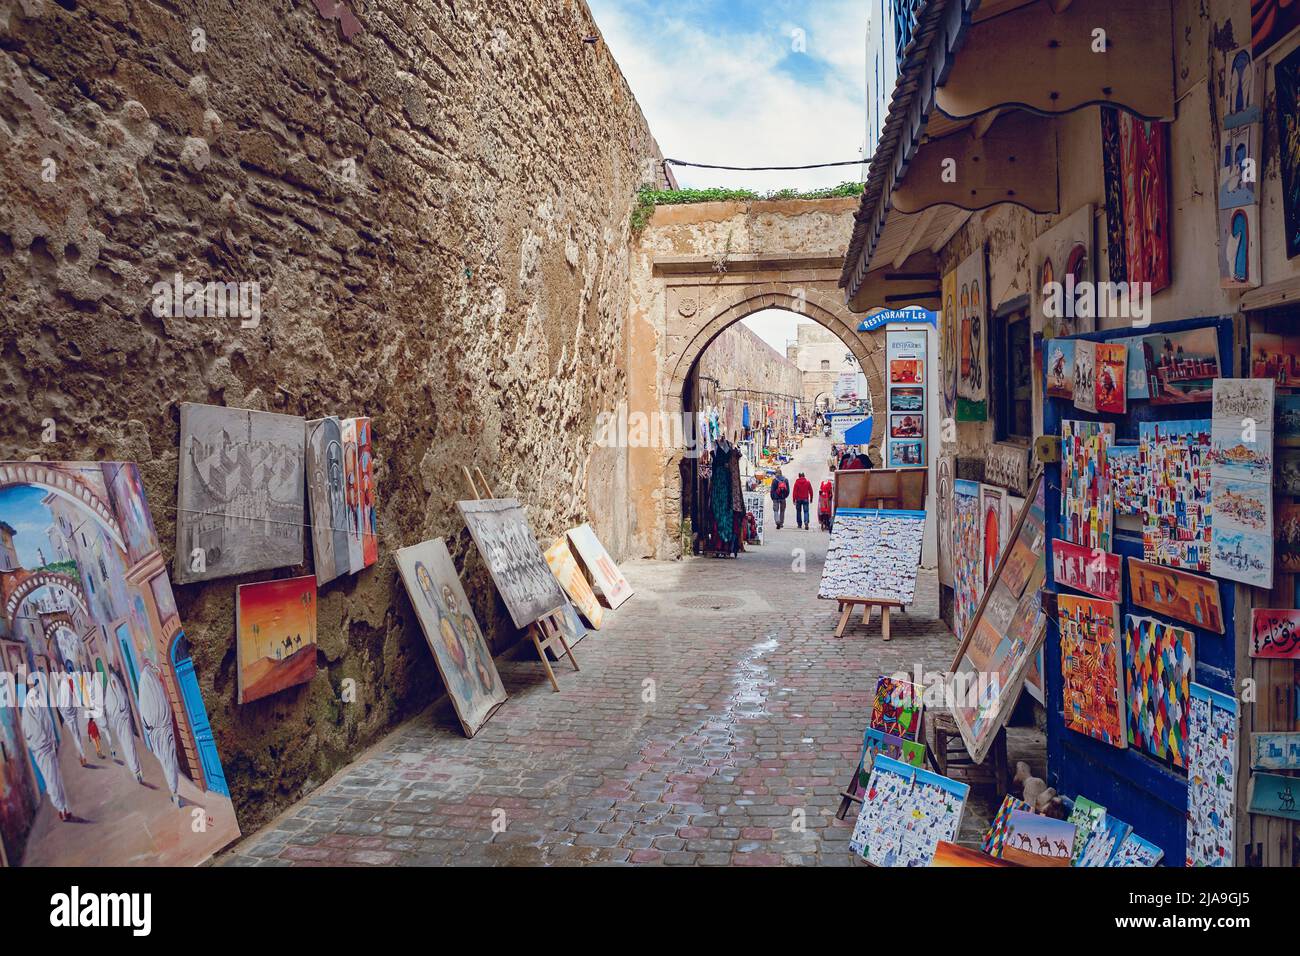 Essaouira (formally Mogador), Morocco.  The Medina.  Inside the old walls of the ramparts there are many small artisan's shops. Stock Photo